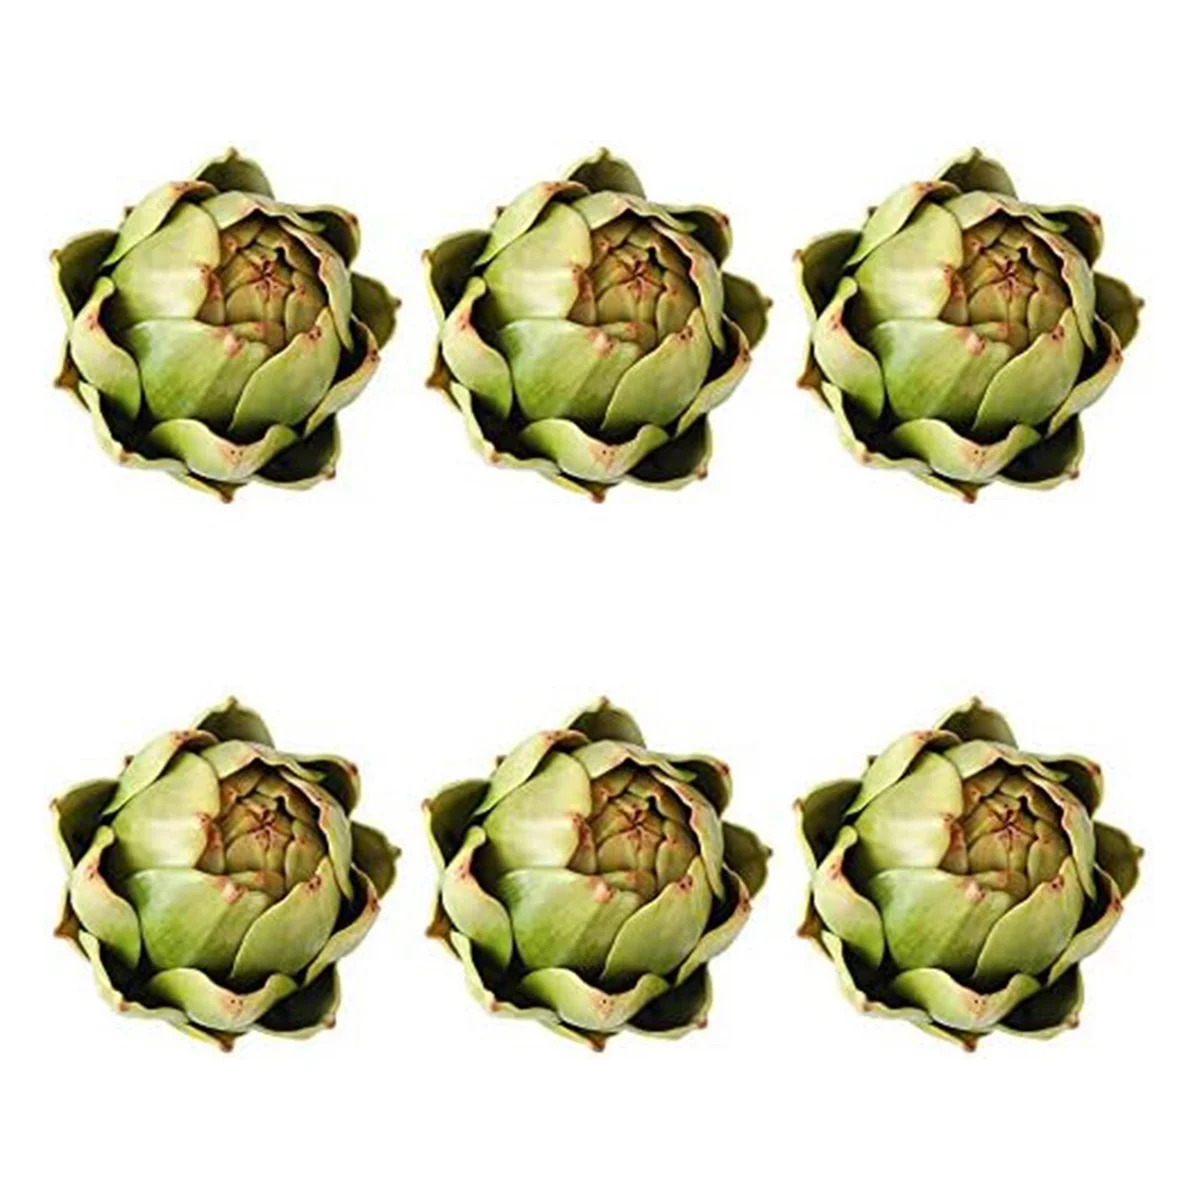 

6Pack Artificial Artichoke Vegetables and Fruits for Home Wedding Party Table Decoration (Green)